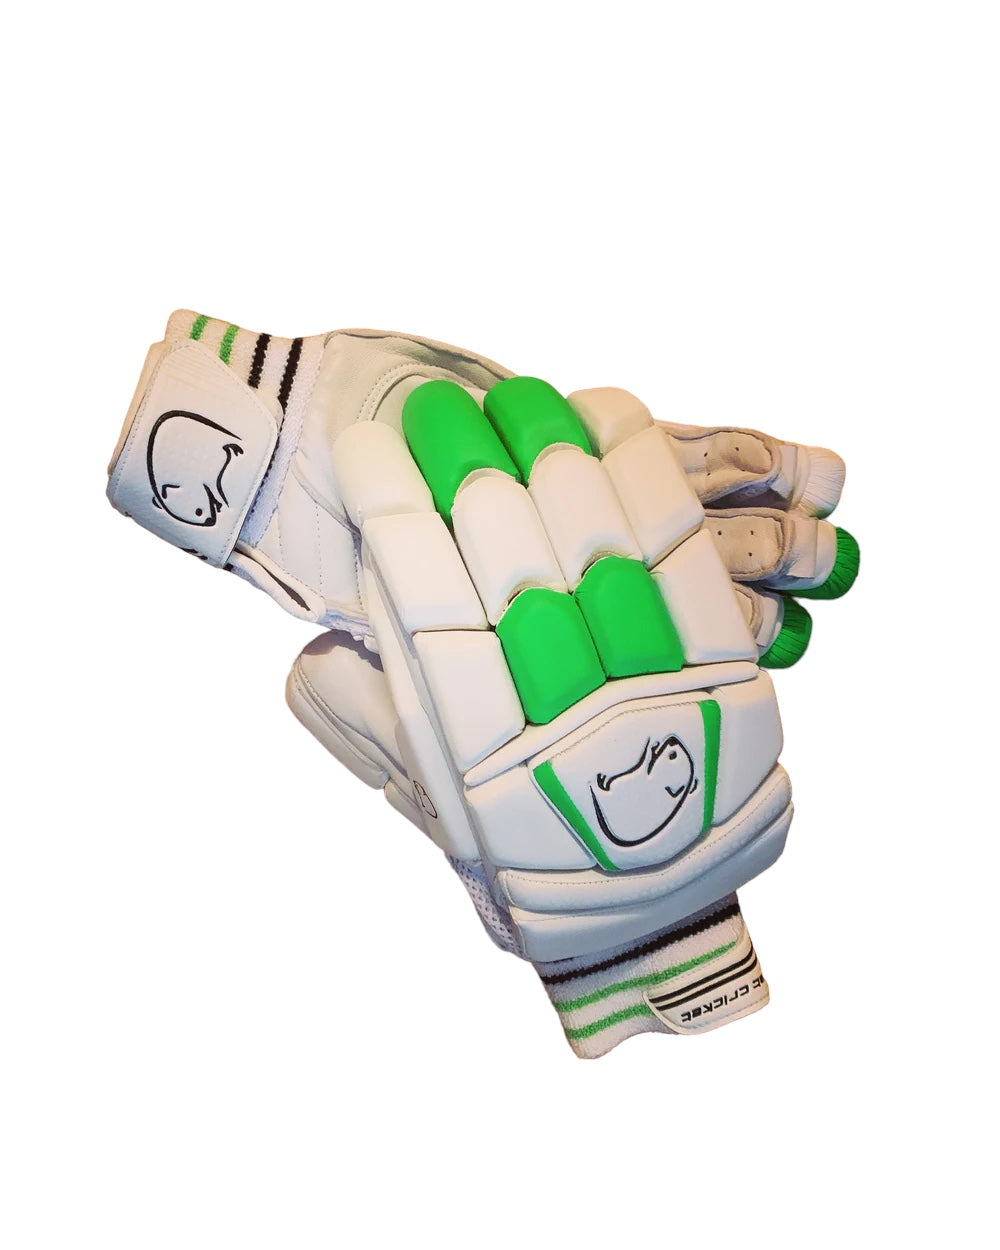 Wombat Vision Batting Gloves MK2 - The Cricket Store